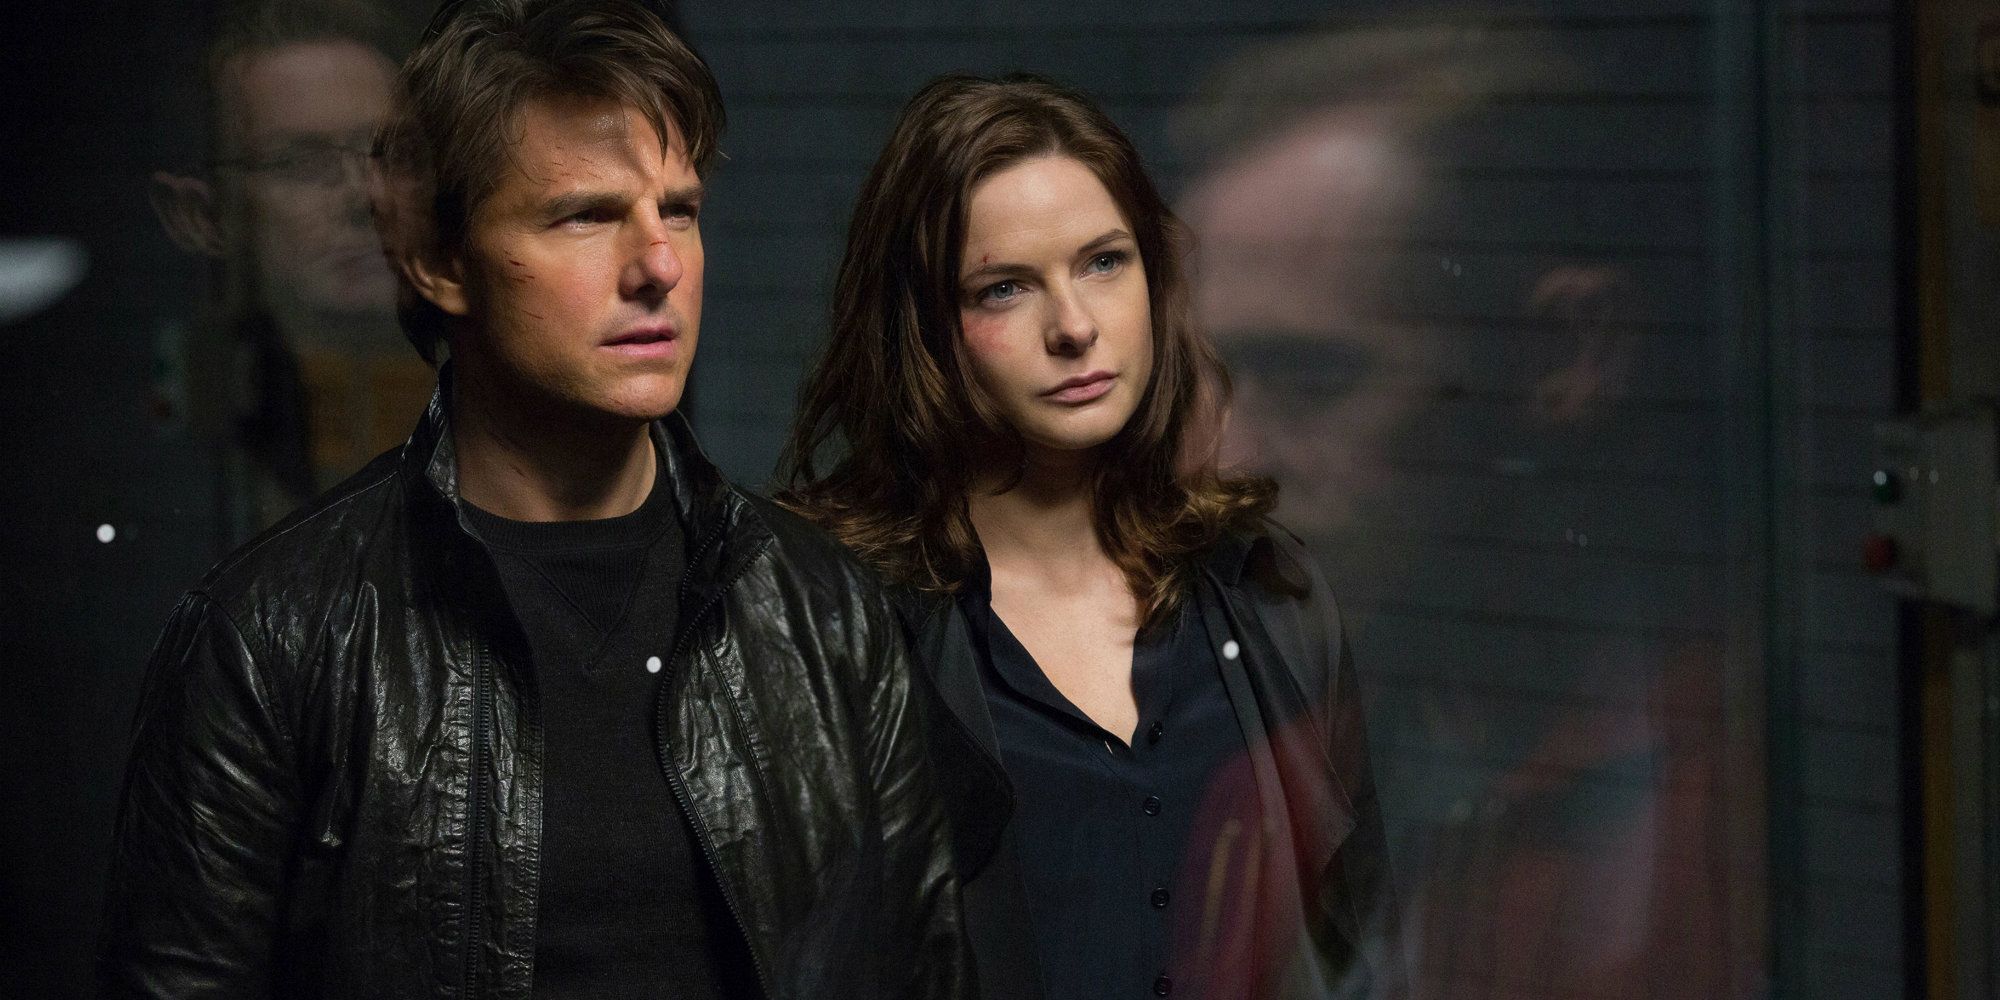 Tom Cruise and Rebecca Ferguson in Mission: Impossible - Rogue Nation